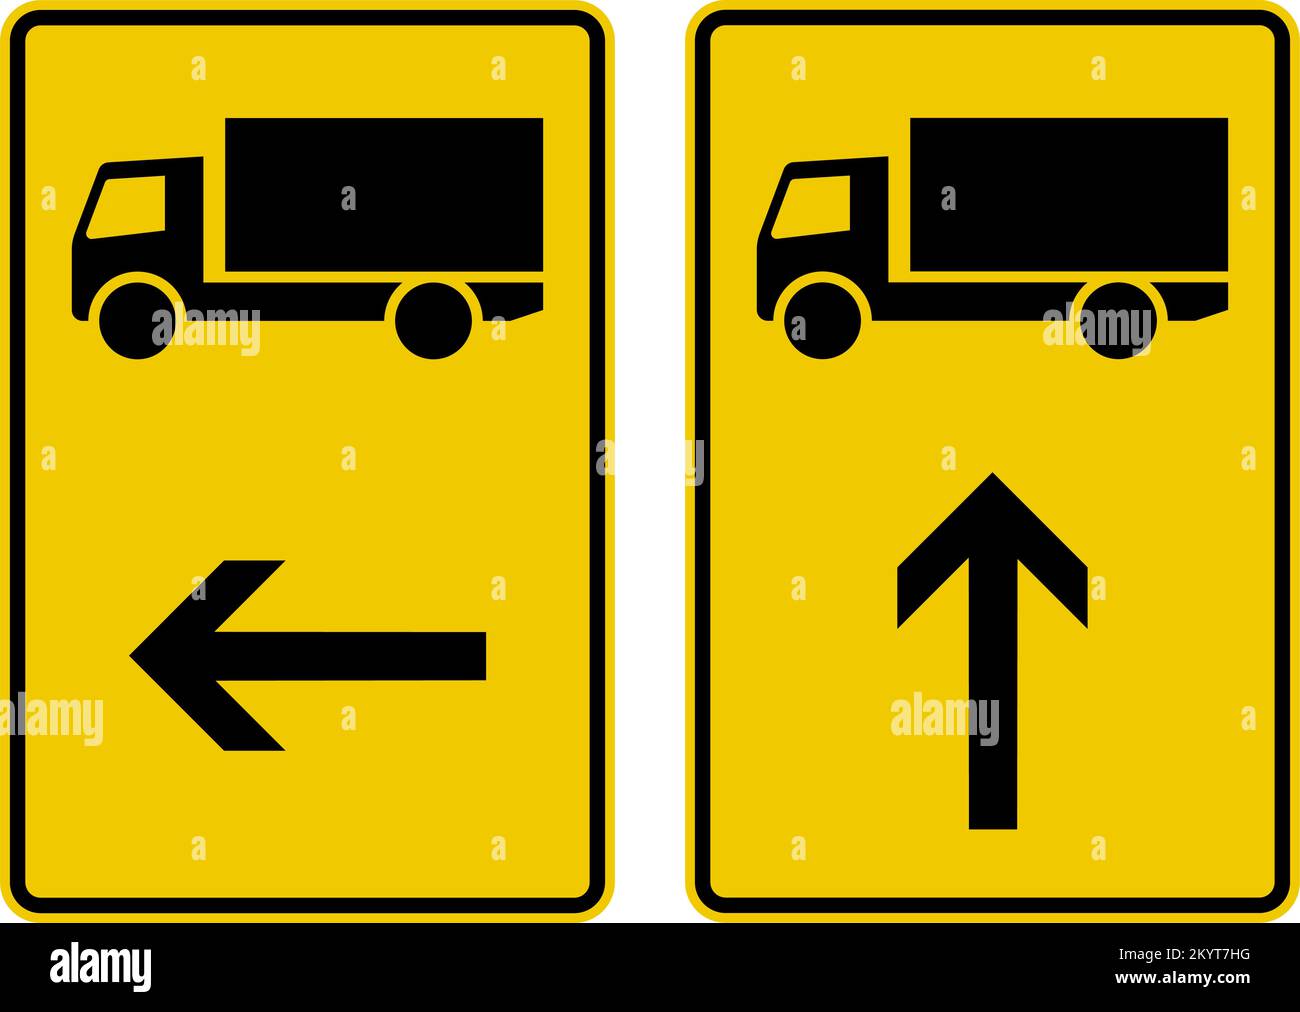 Route directions for mentioned vehicle classes. 1. Turn left 2. Continue stright ahead 3. Turn right , Detour Signs, road signs Germany Stock Vector